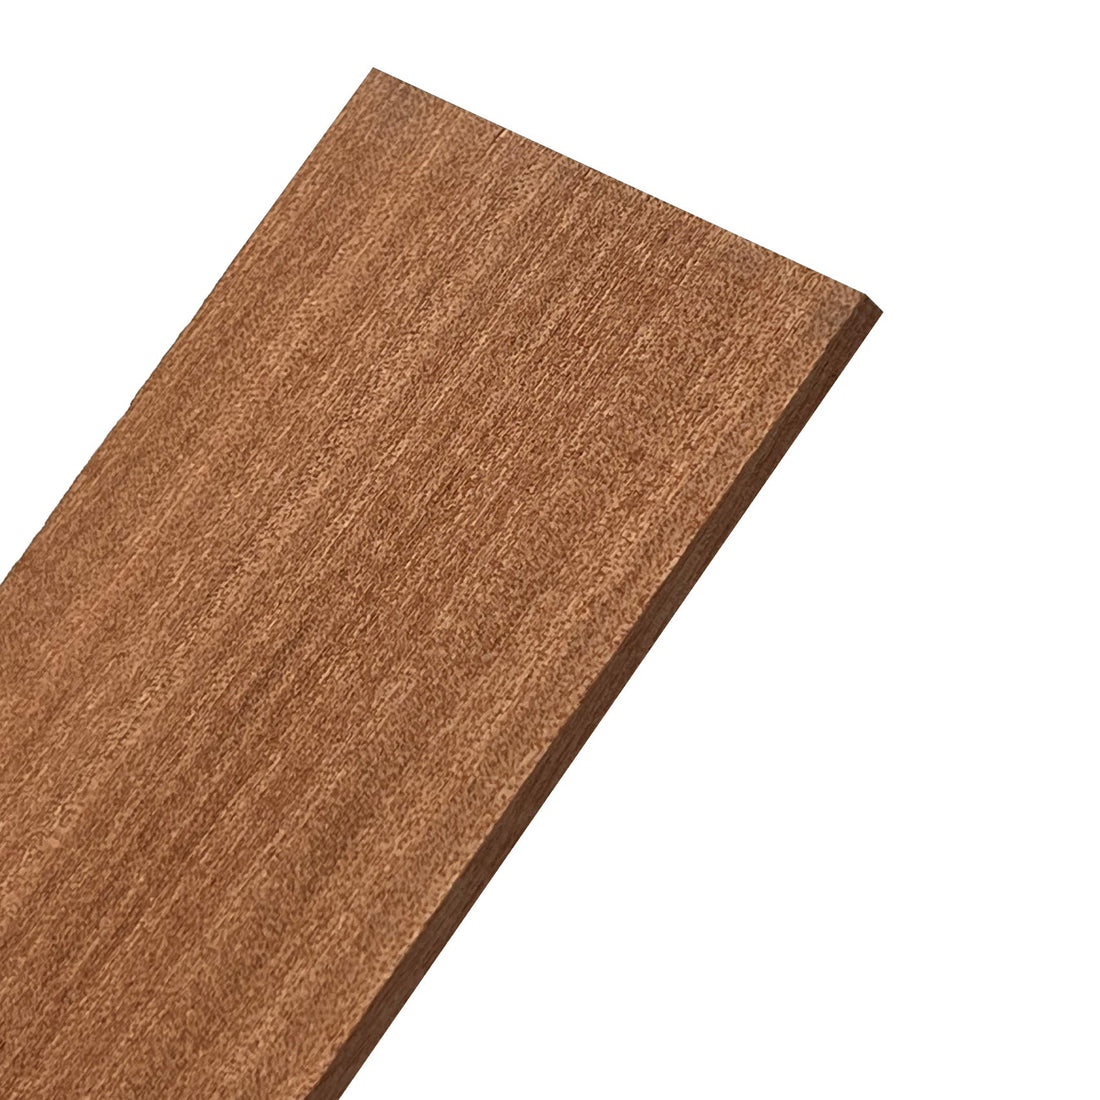 Pack Of 5, Sapele Guitar Head Plates/Overlay Blanks 200 x 100 x 4 mm - Exotic Wood Zone - Buy online Across USA 